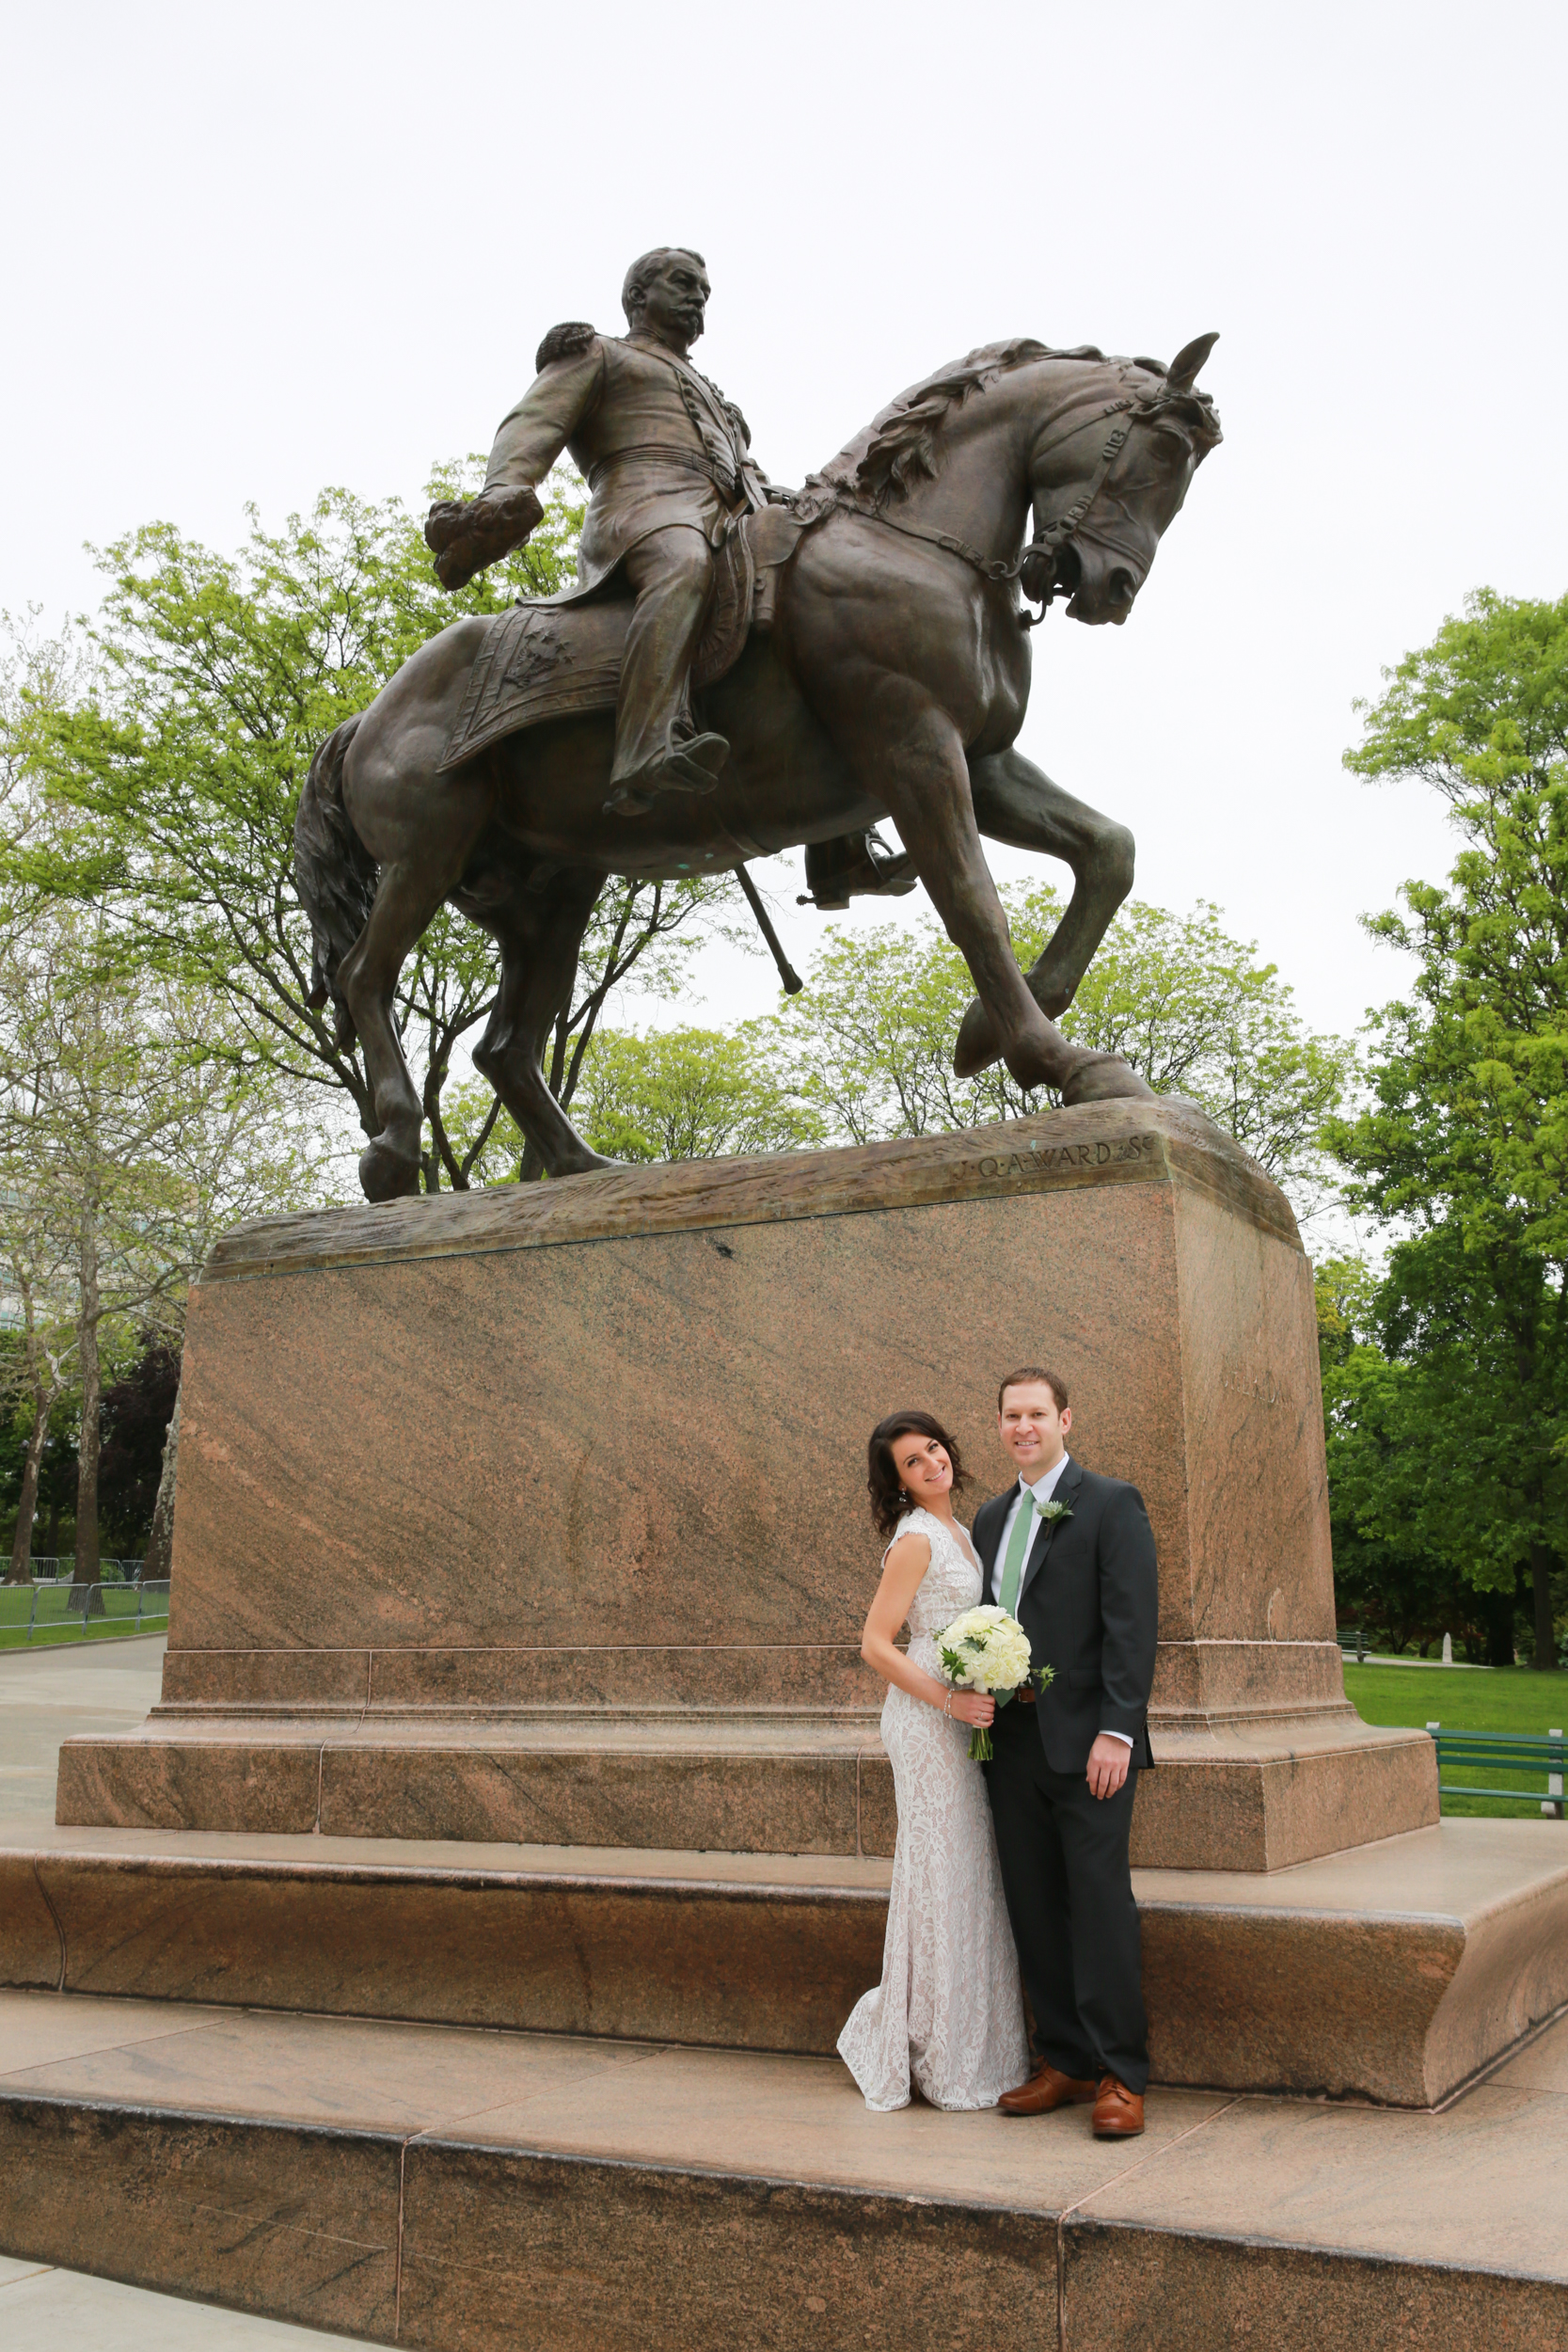 Wedding Portrait of bride and groom in Albany, NY by Aperture Photography